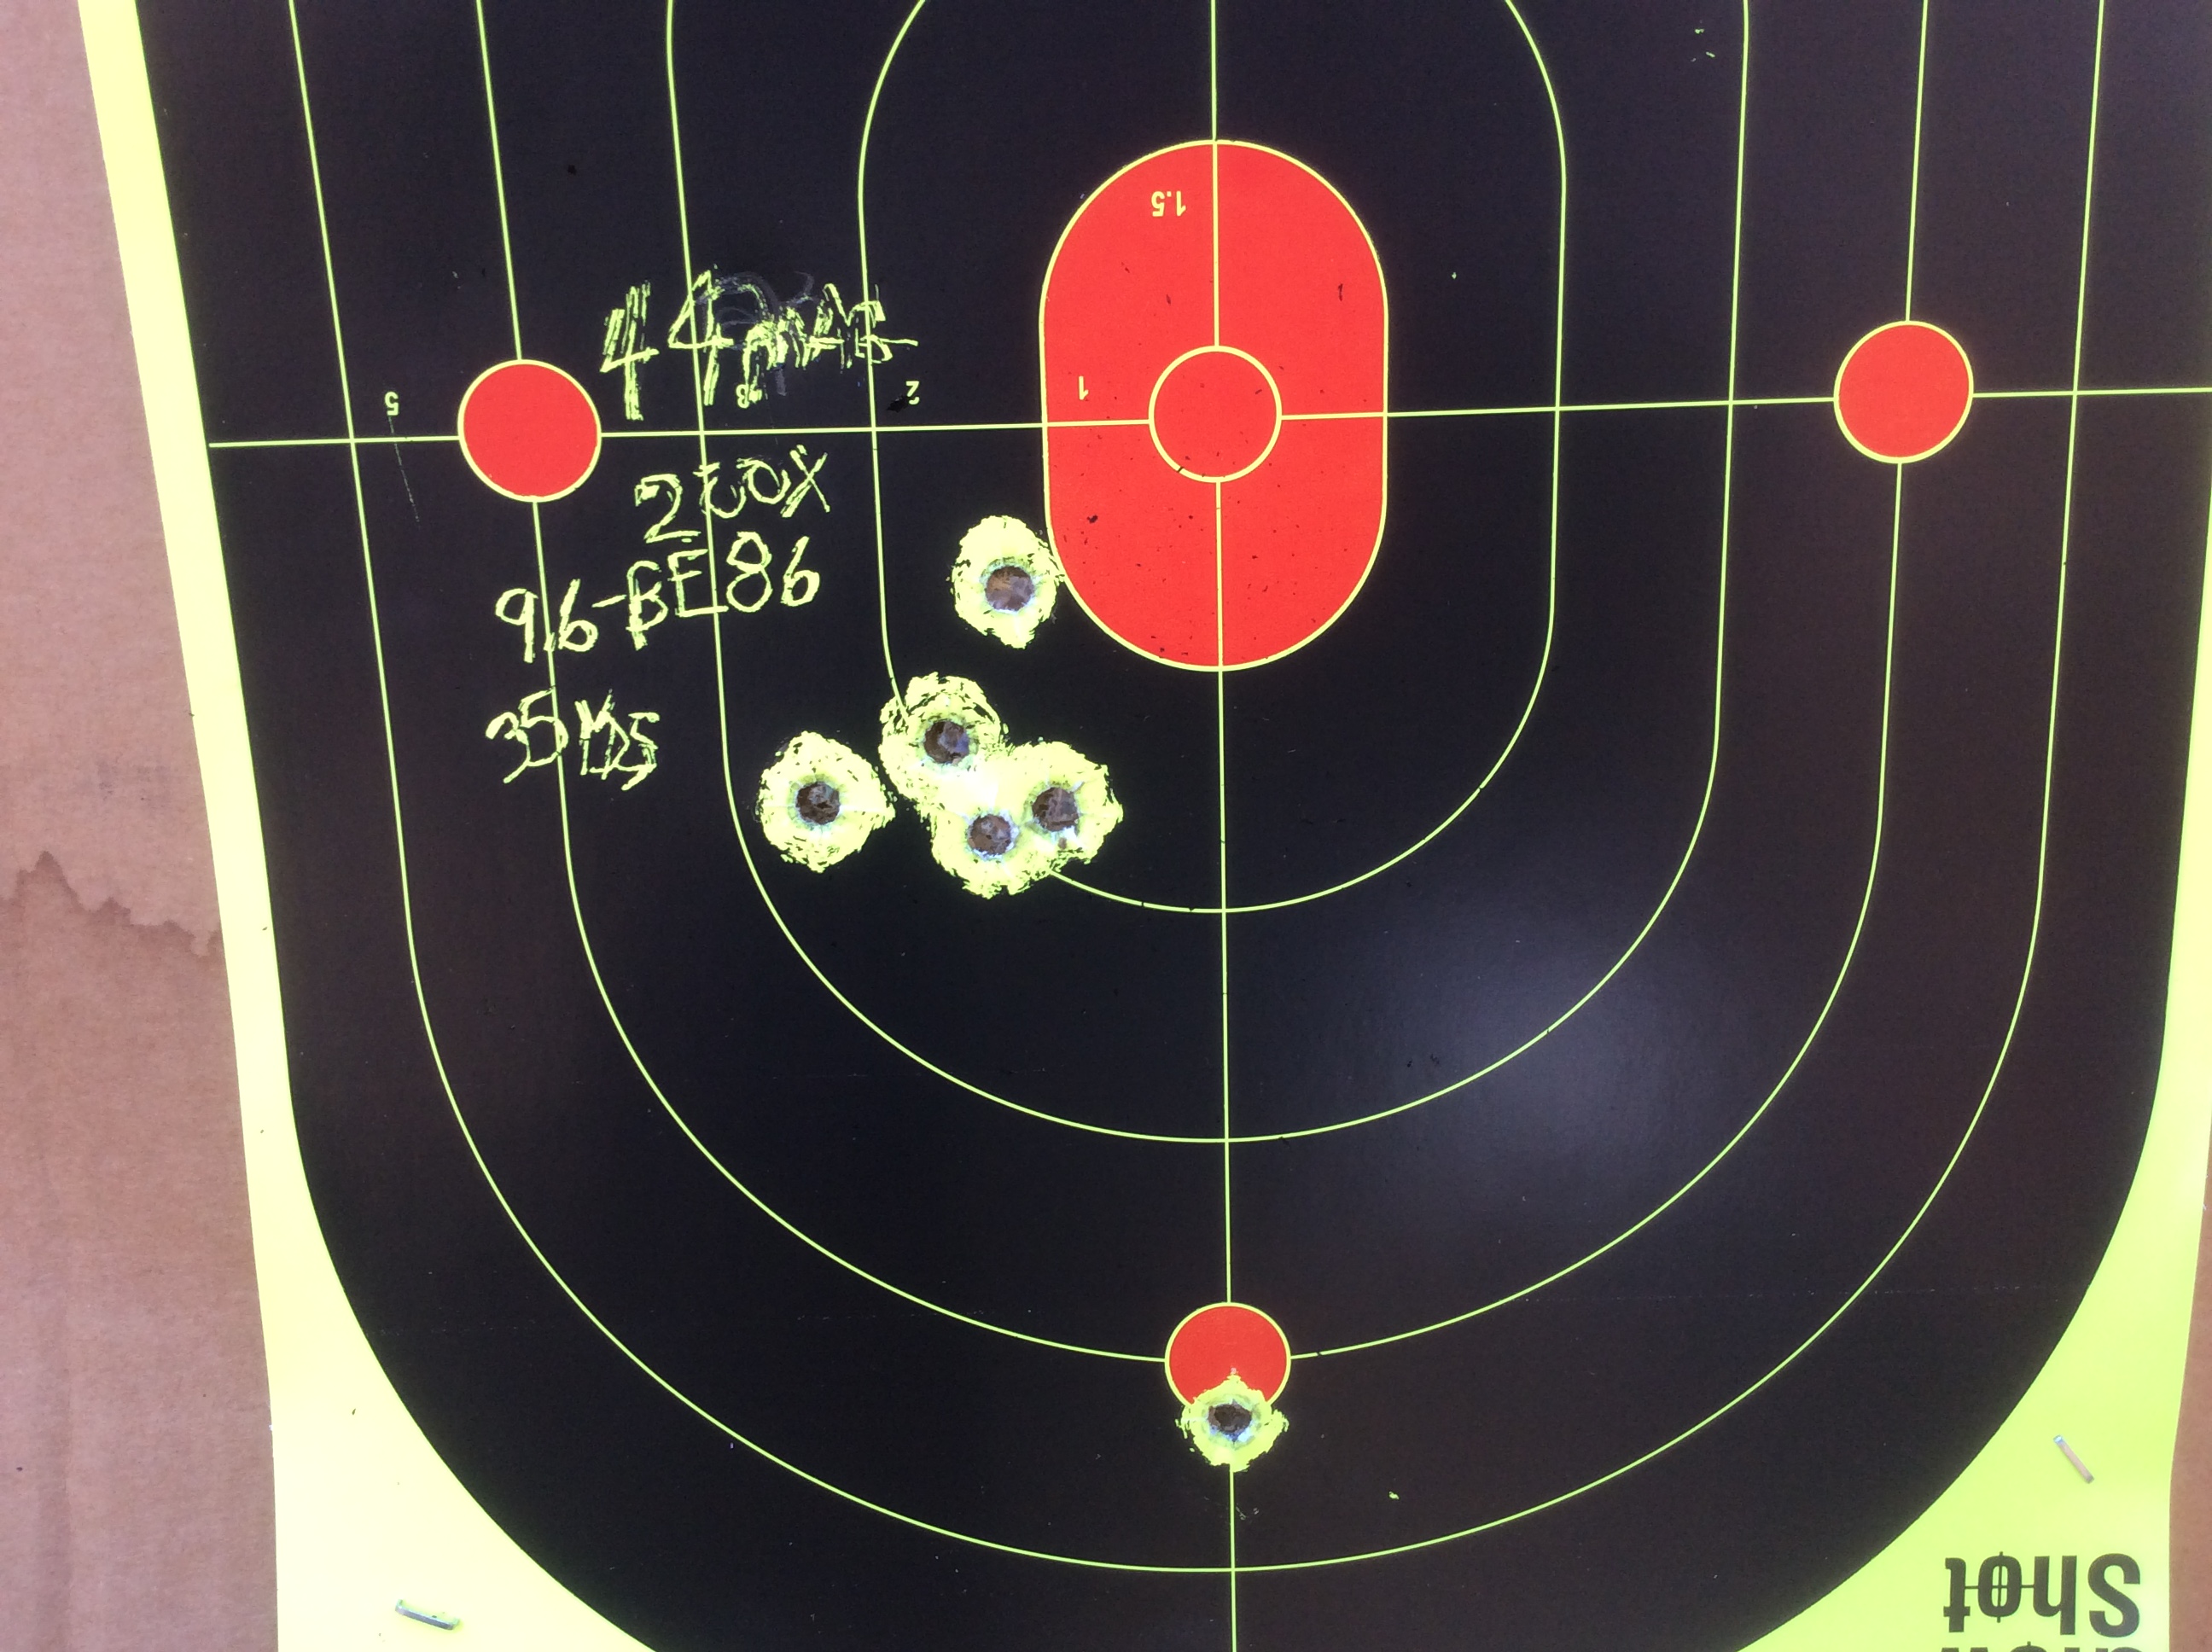 Nice mid level 44 Mag load shots with 1873 Winchester